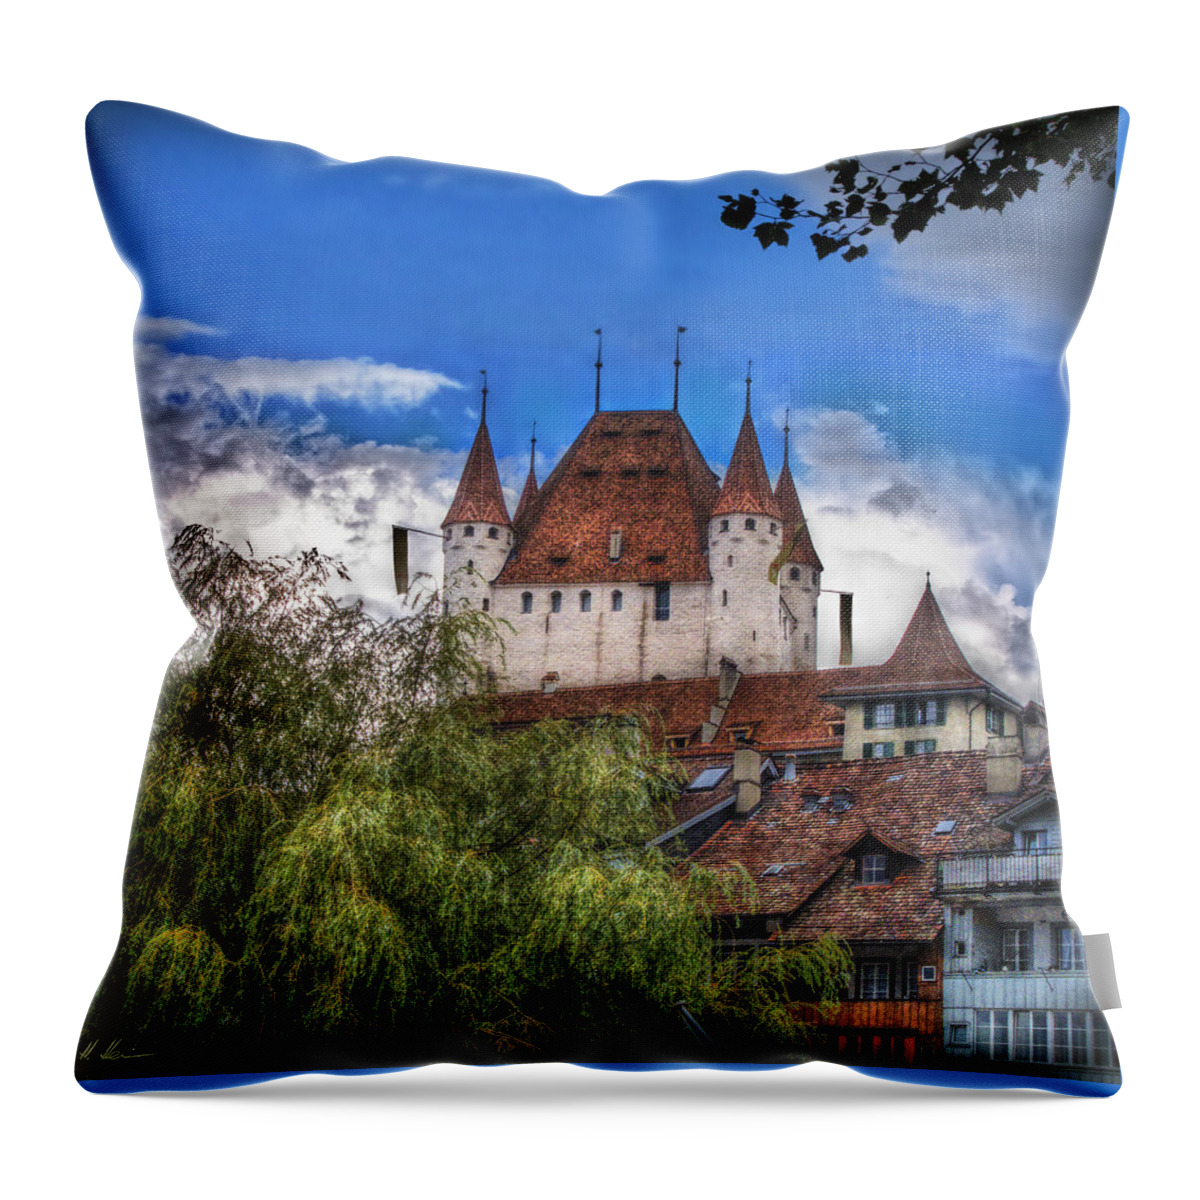 Switzerland Throw Pillow featuring the photograph Thun Castle by Hanny Heim